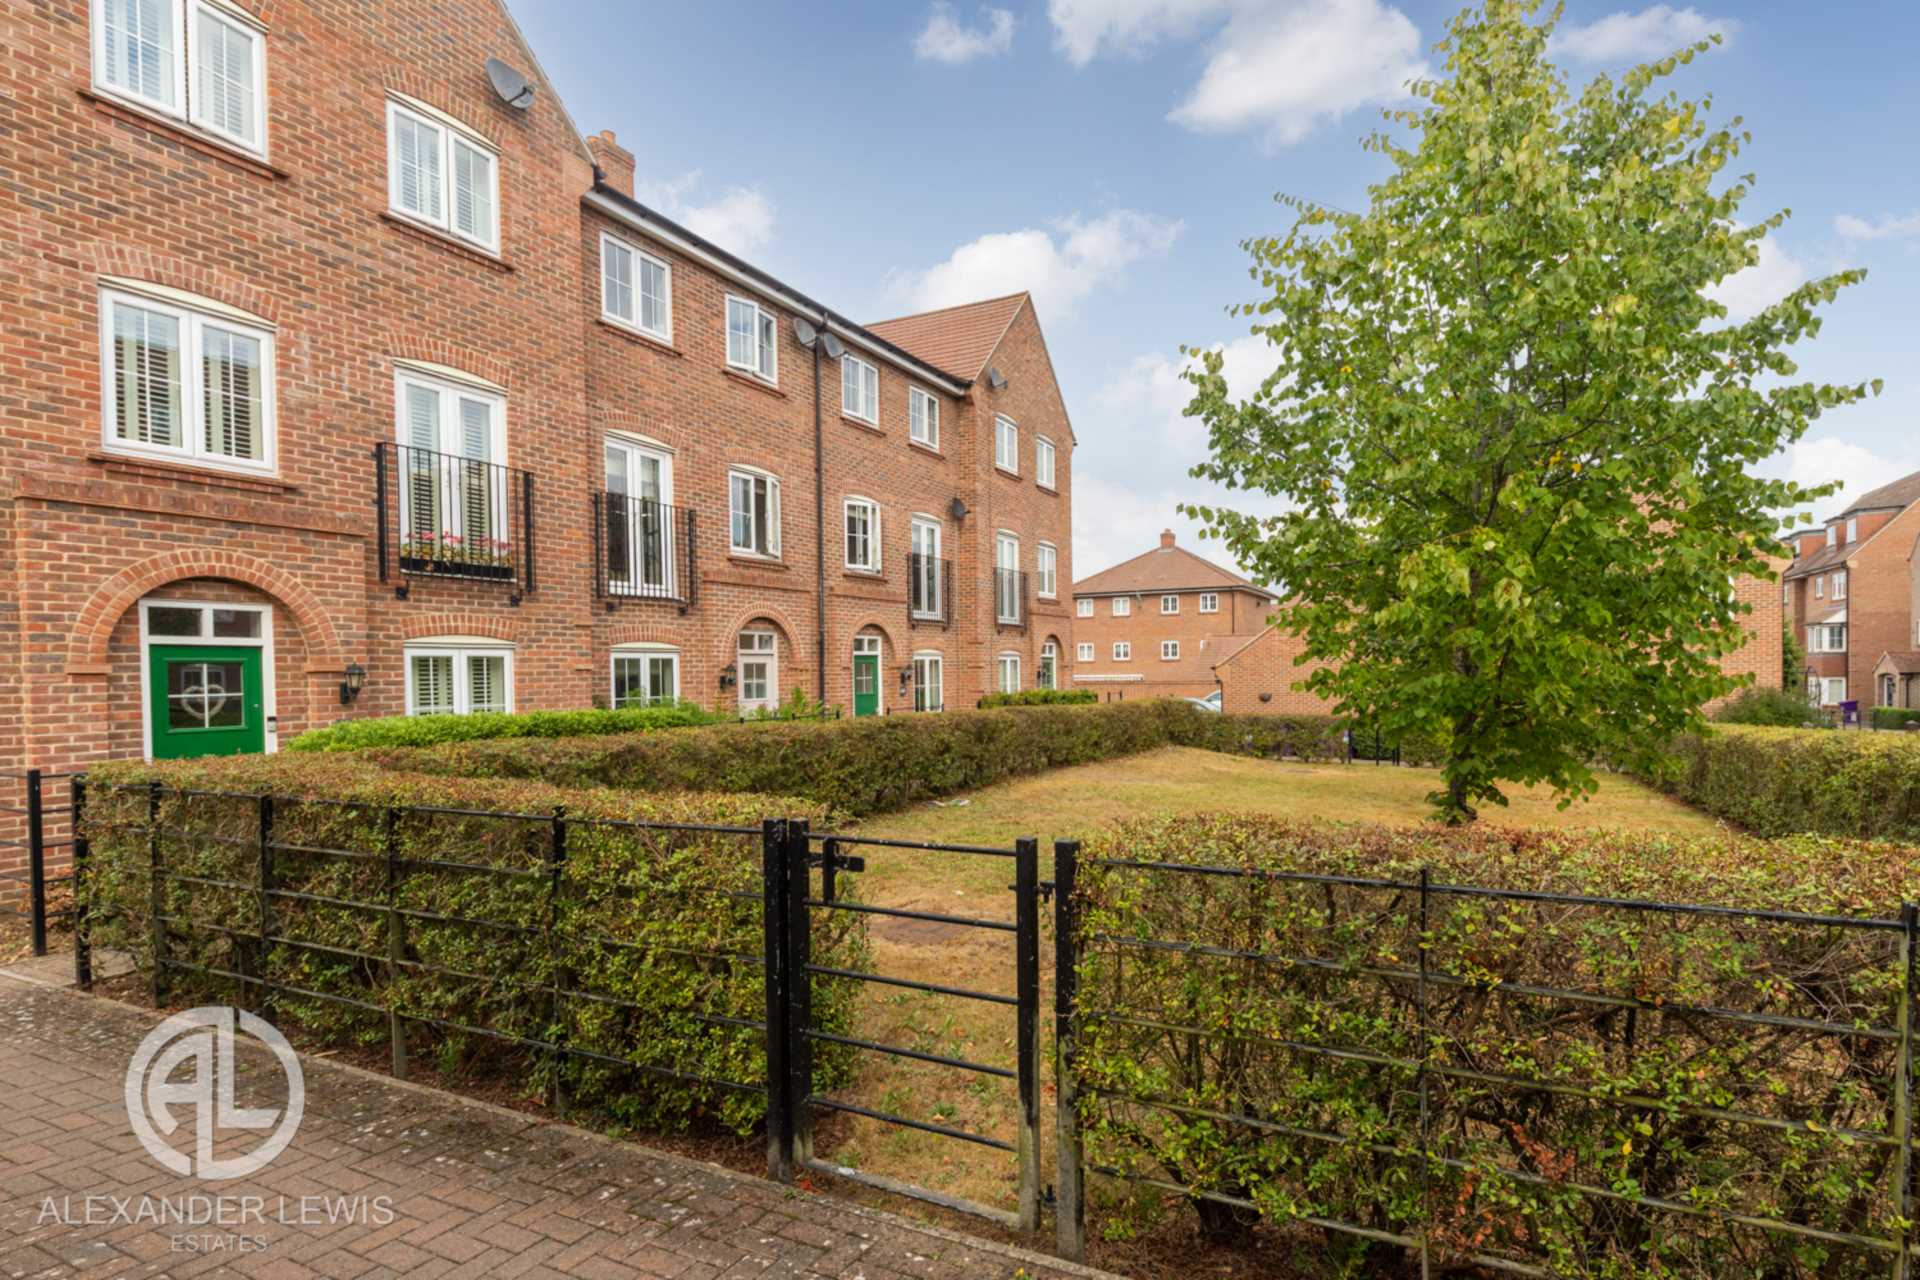 Lindsell Avenue, Letchworth Garden City, SG6 4DQ, Image 1